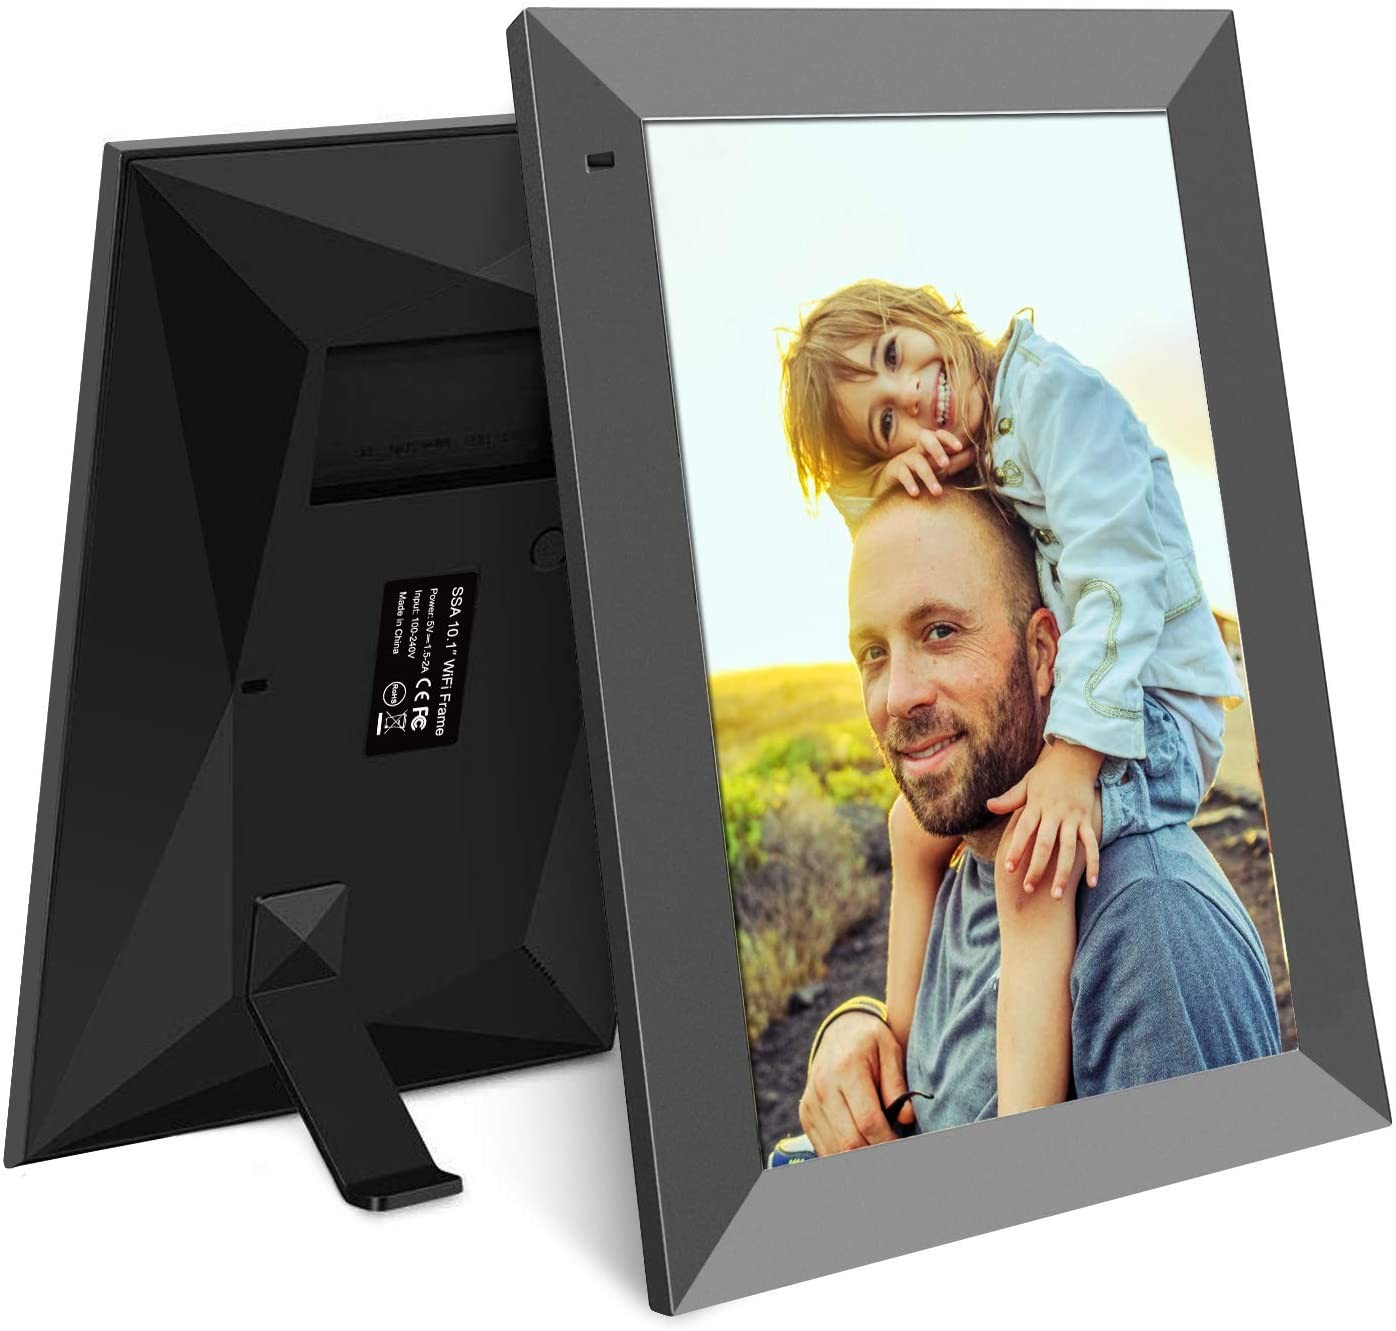 Frameo APP Super Slim 1024*600 IPS  8 Inch wifi digital photo frame best selling on amazon 100% new panel without any dots